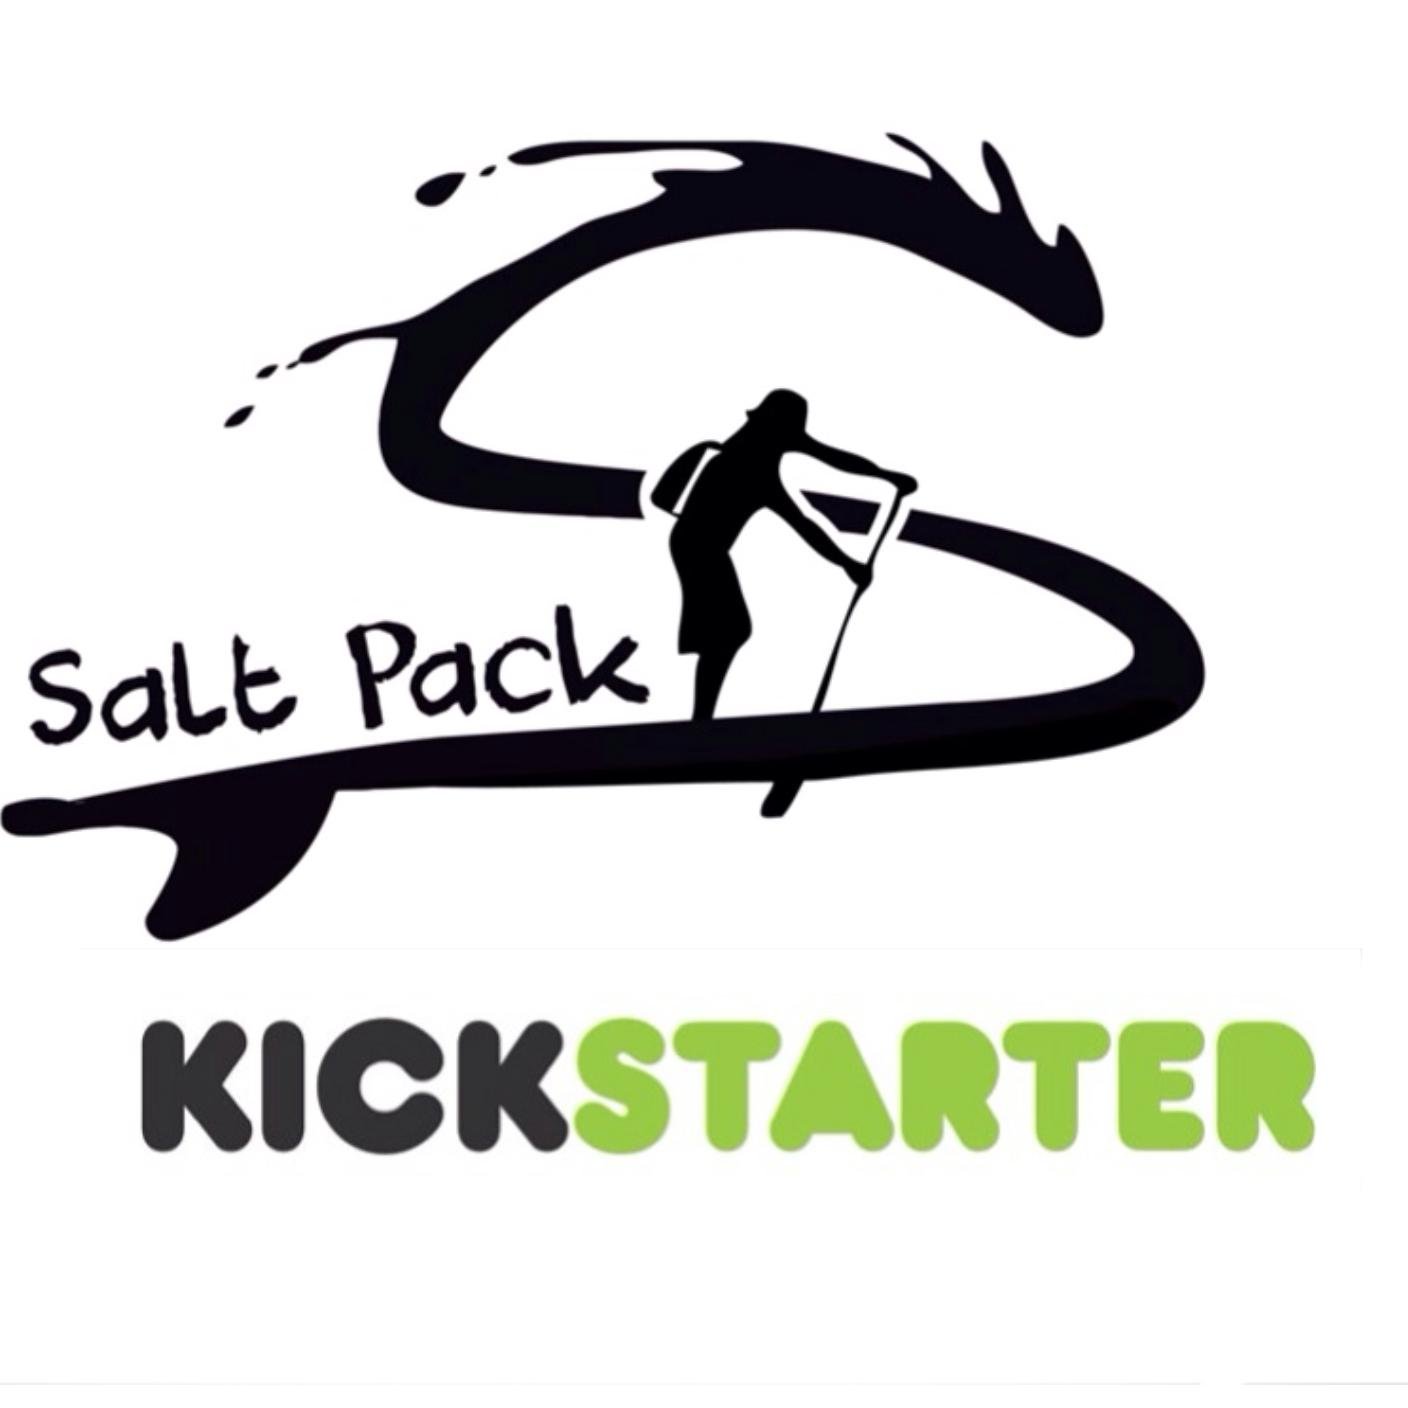 Expandable bags that help you...Rule The Planet! Adventure with us as we launch SALT PACK